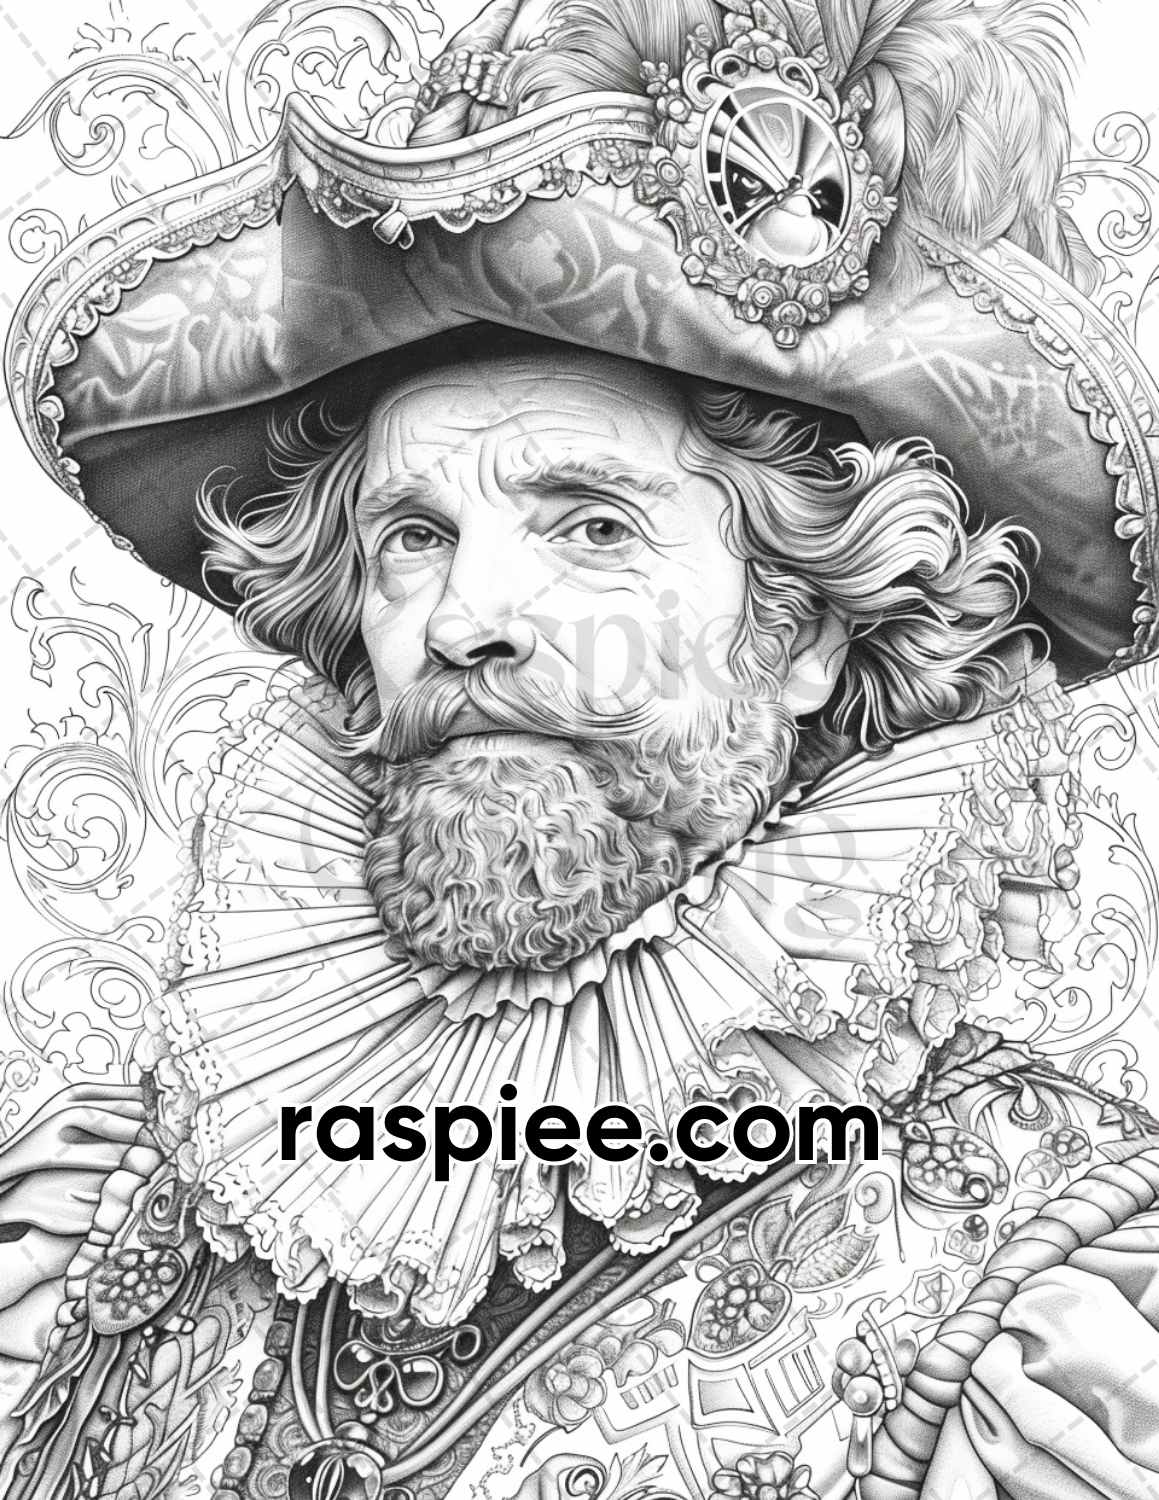 adult coloring pages, adult coloring sheets, adult coloring book pdf, adult coloring book printable, grayscale coloring pages, grayscale coloring books, portrait coloring pages for adults, portrait coloring book, grayscale illustration, Elizabethan British Royal coloring pages